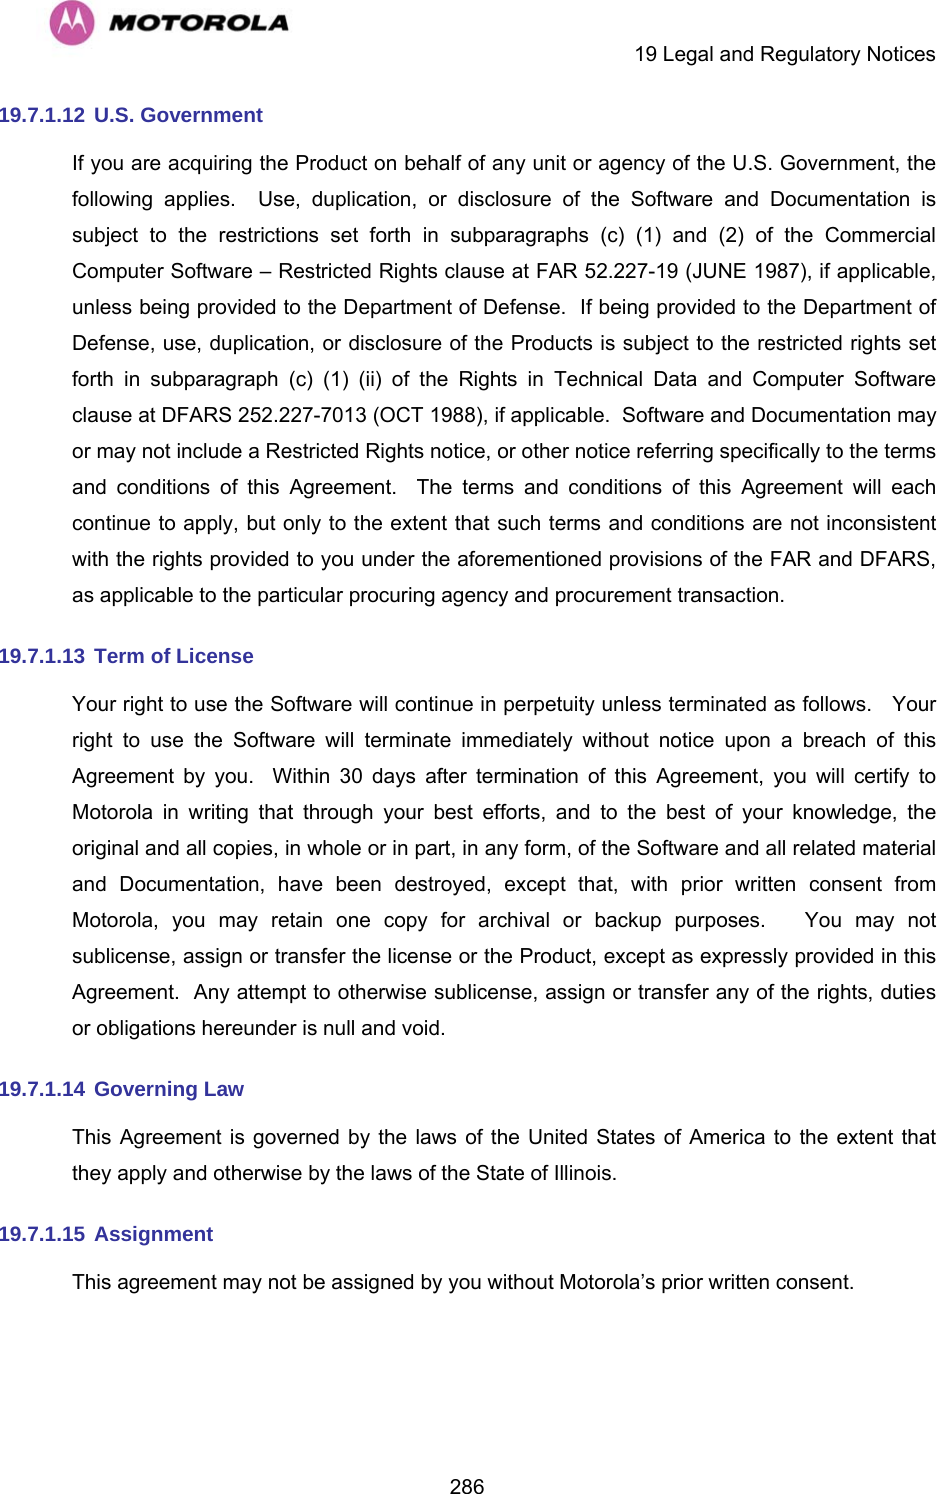     19 Legal and Regulatory Notices  28619.7.1.12  U.S. Government If you are acquiring the Product on behalf of any unit or agency of the U.S. Government, the following applies.  Use, duplication, or disclosure of the Software and Documentation is subject to the restrictions set forth in subparagraphs (c) (1) and (2) of the Commercial Computer Software – Restricted Rights clause at FAR 52.227-19 (JUNE 1987), if applicable, unless being provided to the Department of Defense.  If being provided to the Department of Defense, use, duplication, or disclosure of the Products is subject to the restricted rights set forth in subparagraph (c) (1) (ii) of the Rights in Technical Data and Computer Software clause at DFARS 252.227-7013 (OCT 1988), if applicable.  Software and Documentation may or may not include a Restricted Rights notice, or other notice referring specifically to the terms and conditions of this Agreement.  The terms and conditions of this Agreement will each continue to apply, but only to the extent that such terms and conditions are not inconsistent with the rights provided to you under the aforementioned provisions of the FAR and DFARS, as applicable to the particular procuring agency and procurement transaction. 19.7.1.13  Term of License Your right to use the Software will continue in perpetuity unless terminated as follows.   Your right to use the Software will terminate immediately without notice upon a breach of this Agreement by you.  Within 30 days after termination of this Agreement, you will certify to Motorola in writing that through your best efforts, and to the best of your knowledge, the original and all copies, in whole or in part, in any form, of the Software and all related material and Documentation, have been destroyed, except that, with prior written consent from Motorola, you may retain one copy for archival or backup purposes.   You may not sublicense, assign or transfer the license or the Product, except as expressly provided in this Agreement.  Any attempt to otherwise sublicense, assign or transfer any of the rights, duties or obligations hereunder is null and void. 19.7.1.14  Governing Law This Agreement is governed by the laws of the United States of America to the extent that they apply and otherwise by the laws of the State of Illinois. 19.7.1.15  Assignment This agreement may not be assigned by you without Motorola’s prior written consent. 